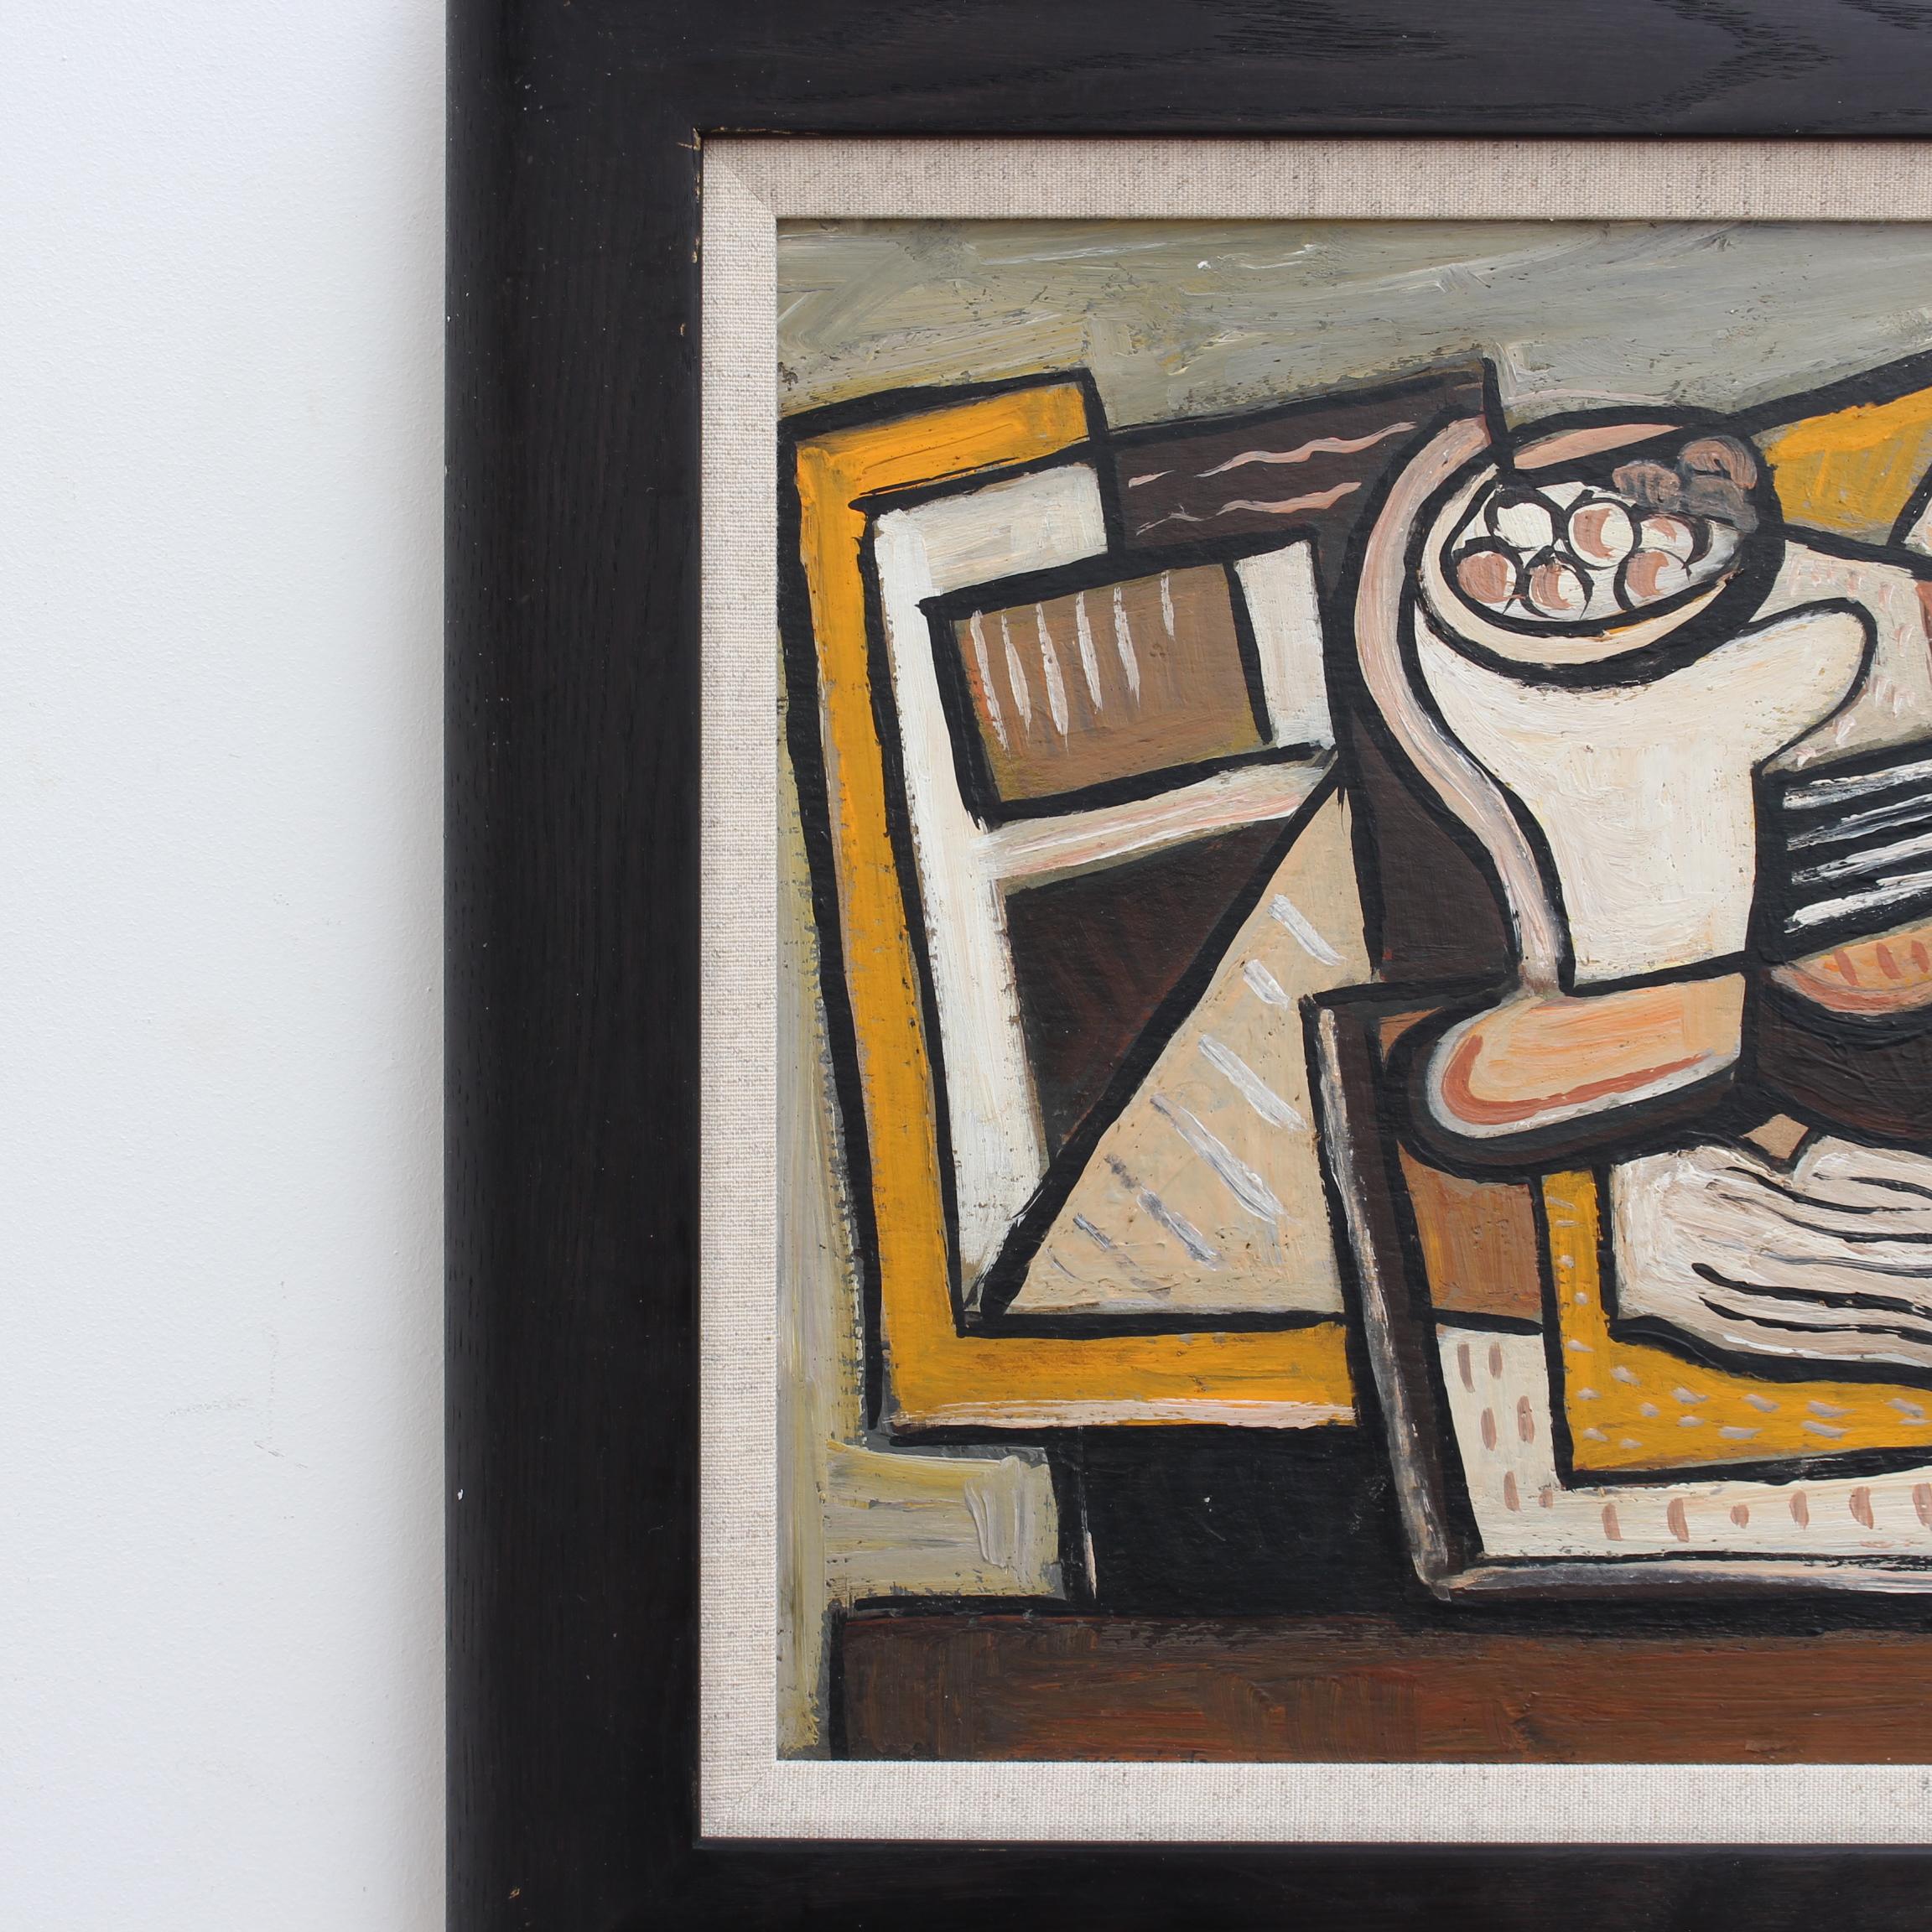 'Cubist Still Life', oil on board, with guitar, wine bottle and glasses, (circa 1950s - 1960s), by an unknown artist. A masterly cubist still life representation depicting items atop a wooden table painted in colours of earthy browns, grey, beige,